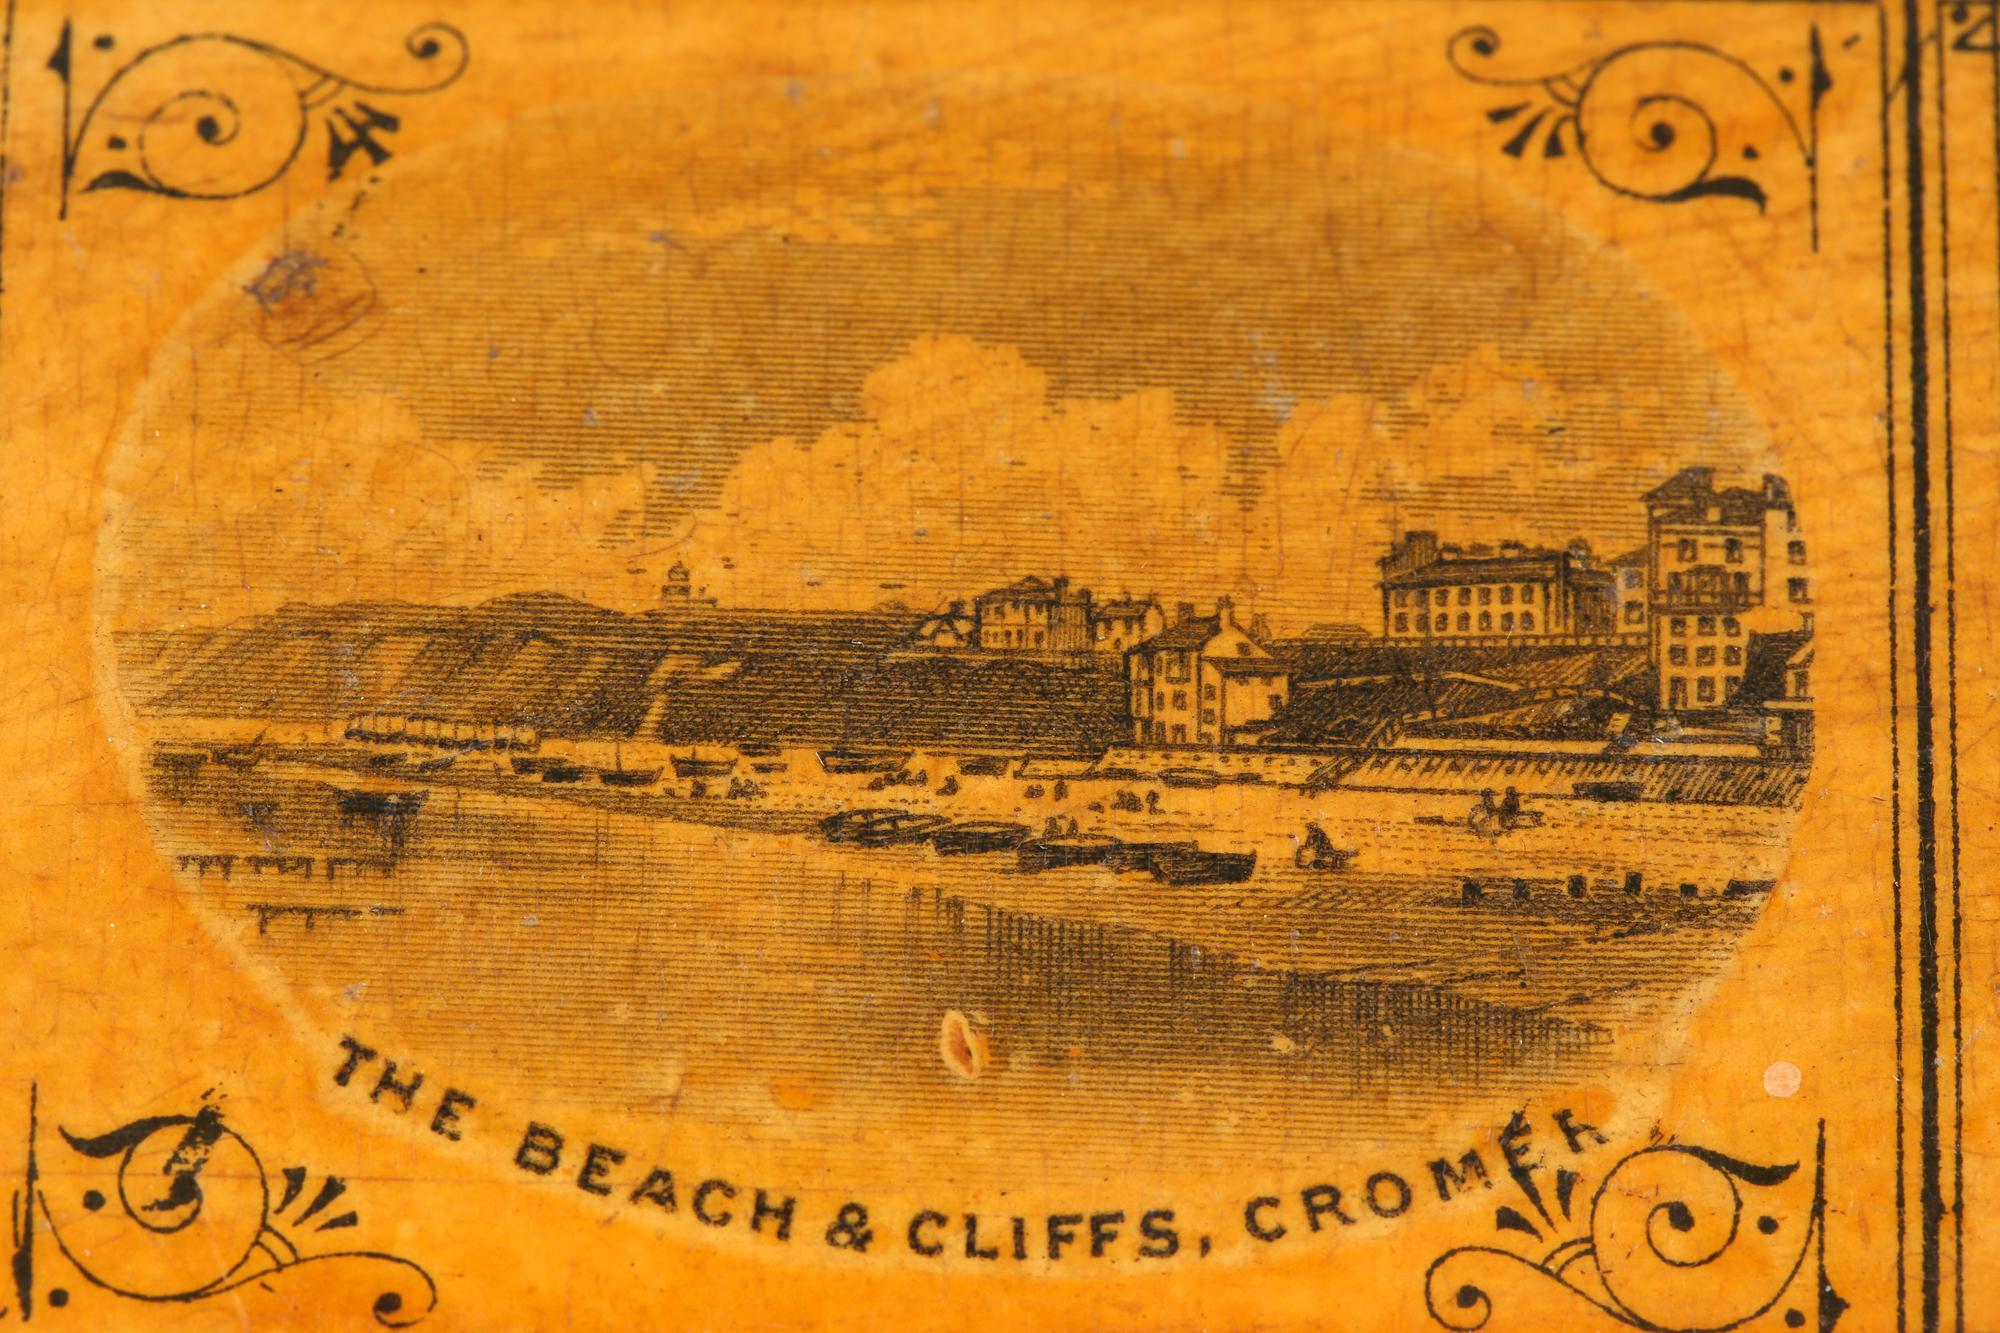 19th Century Mauchline Wooden Postal Ruler and Paper Folder with Beach & Cliffs, Cromer For Sale